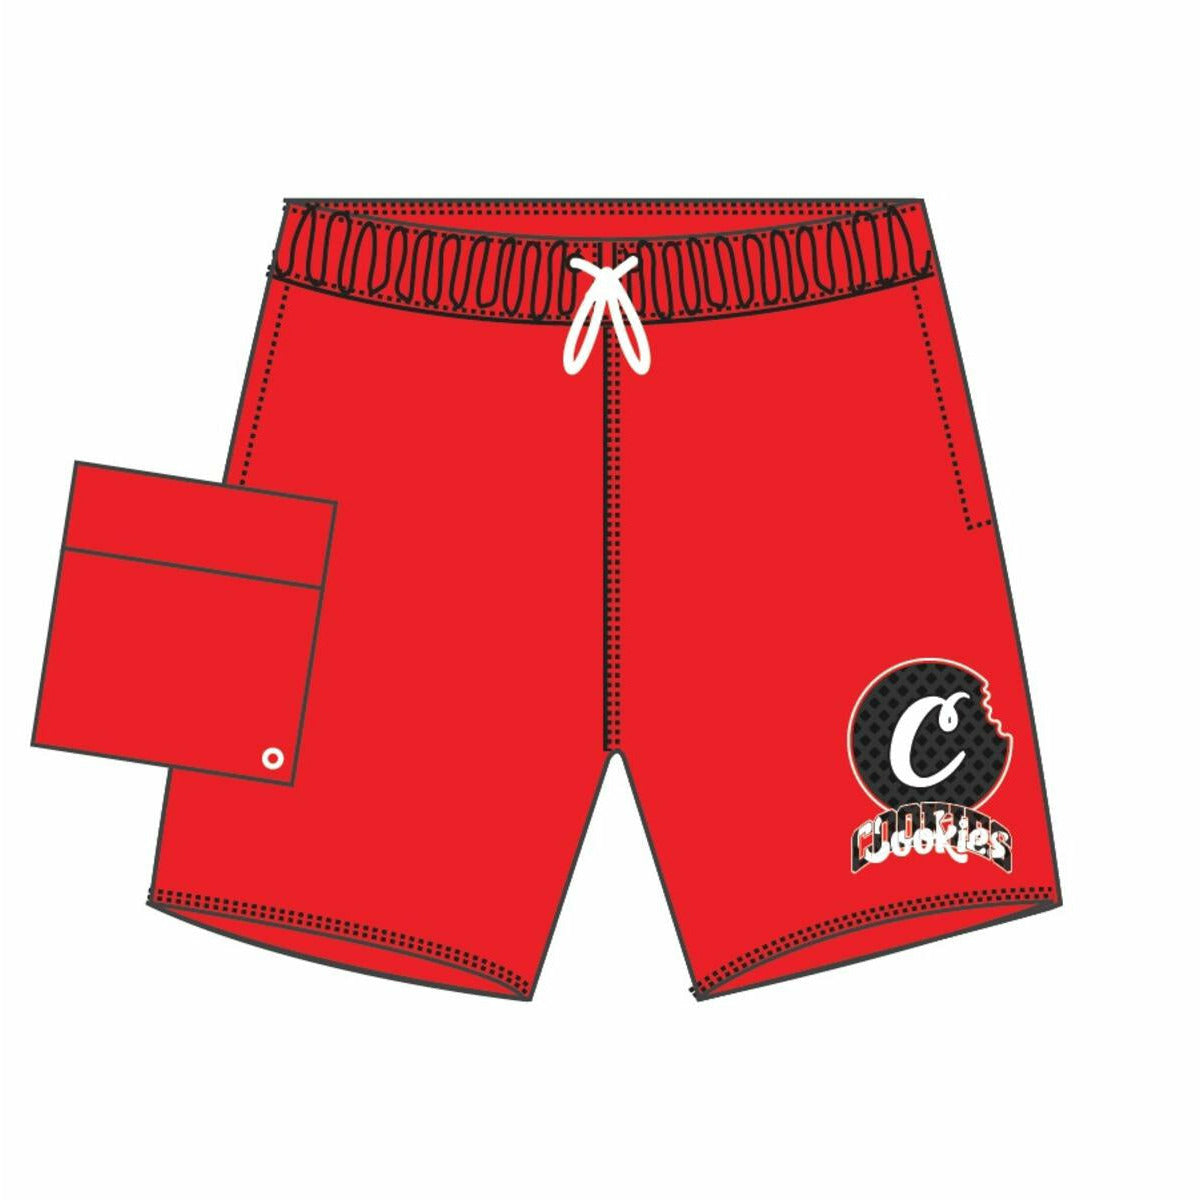 Cookies Loud Pack Stretch Red Board Shorts (1557B5853)